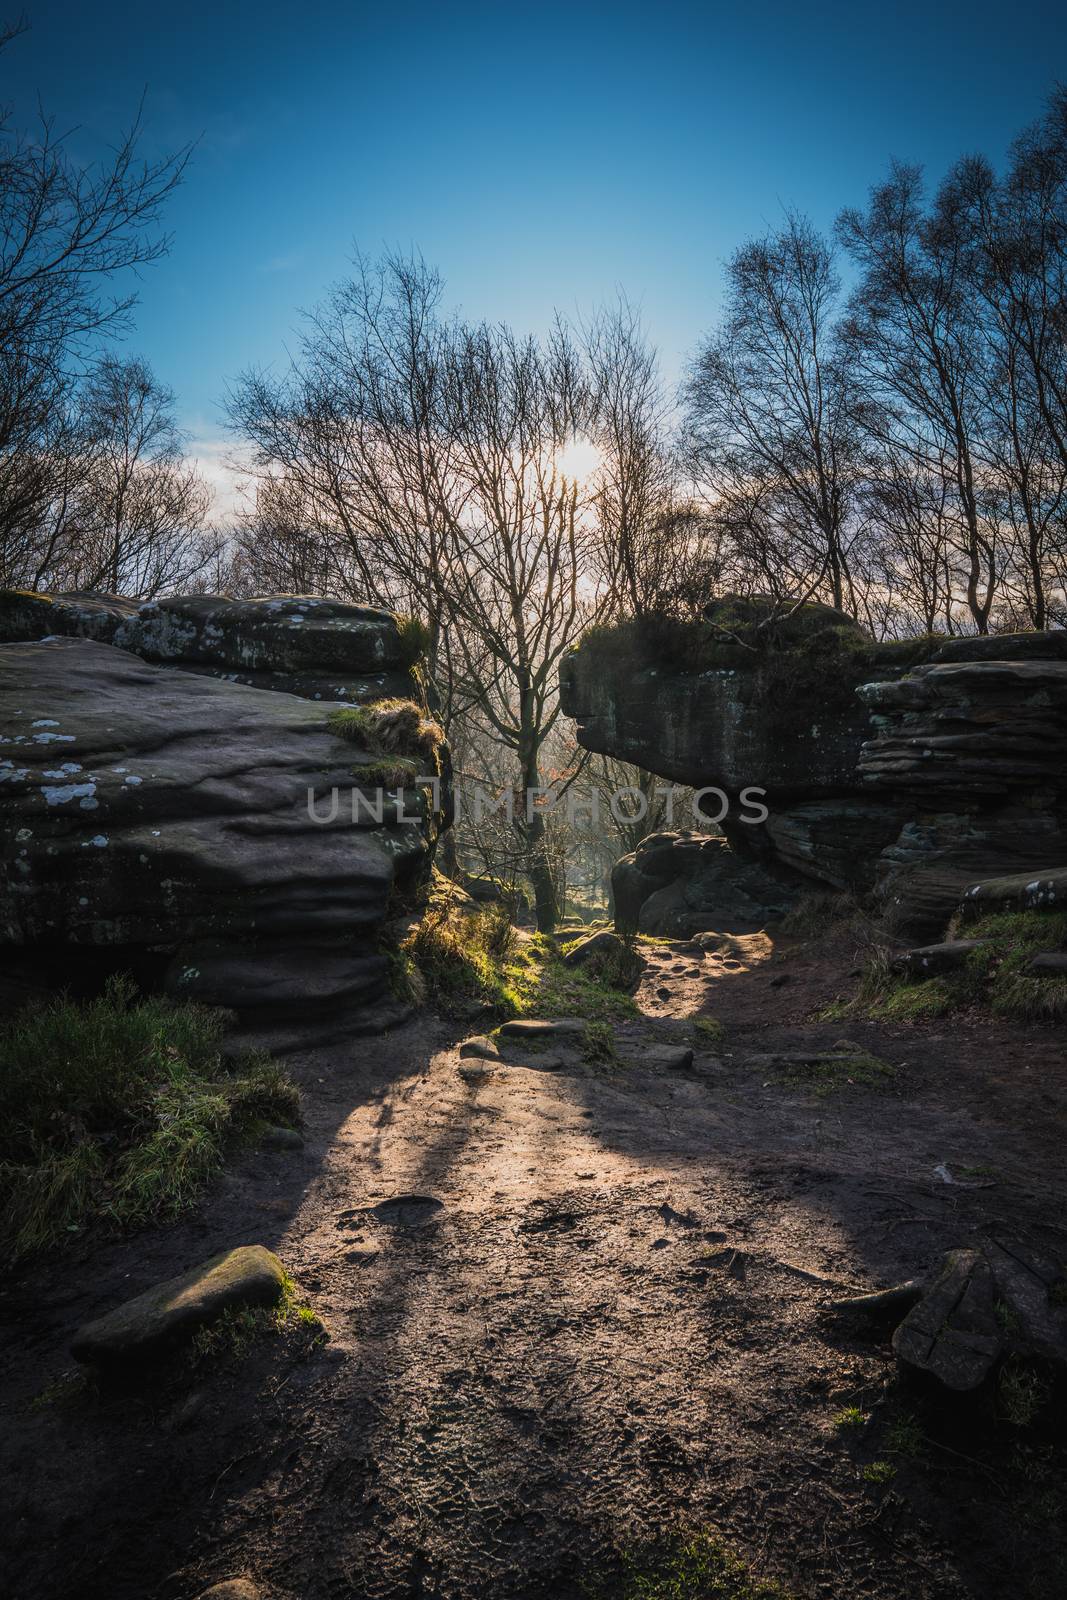 Brimham Rocks in North Yorkshire by samULvisuals